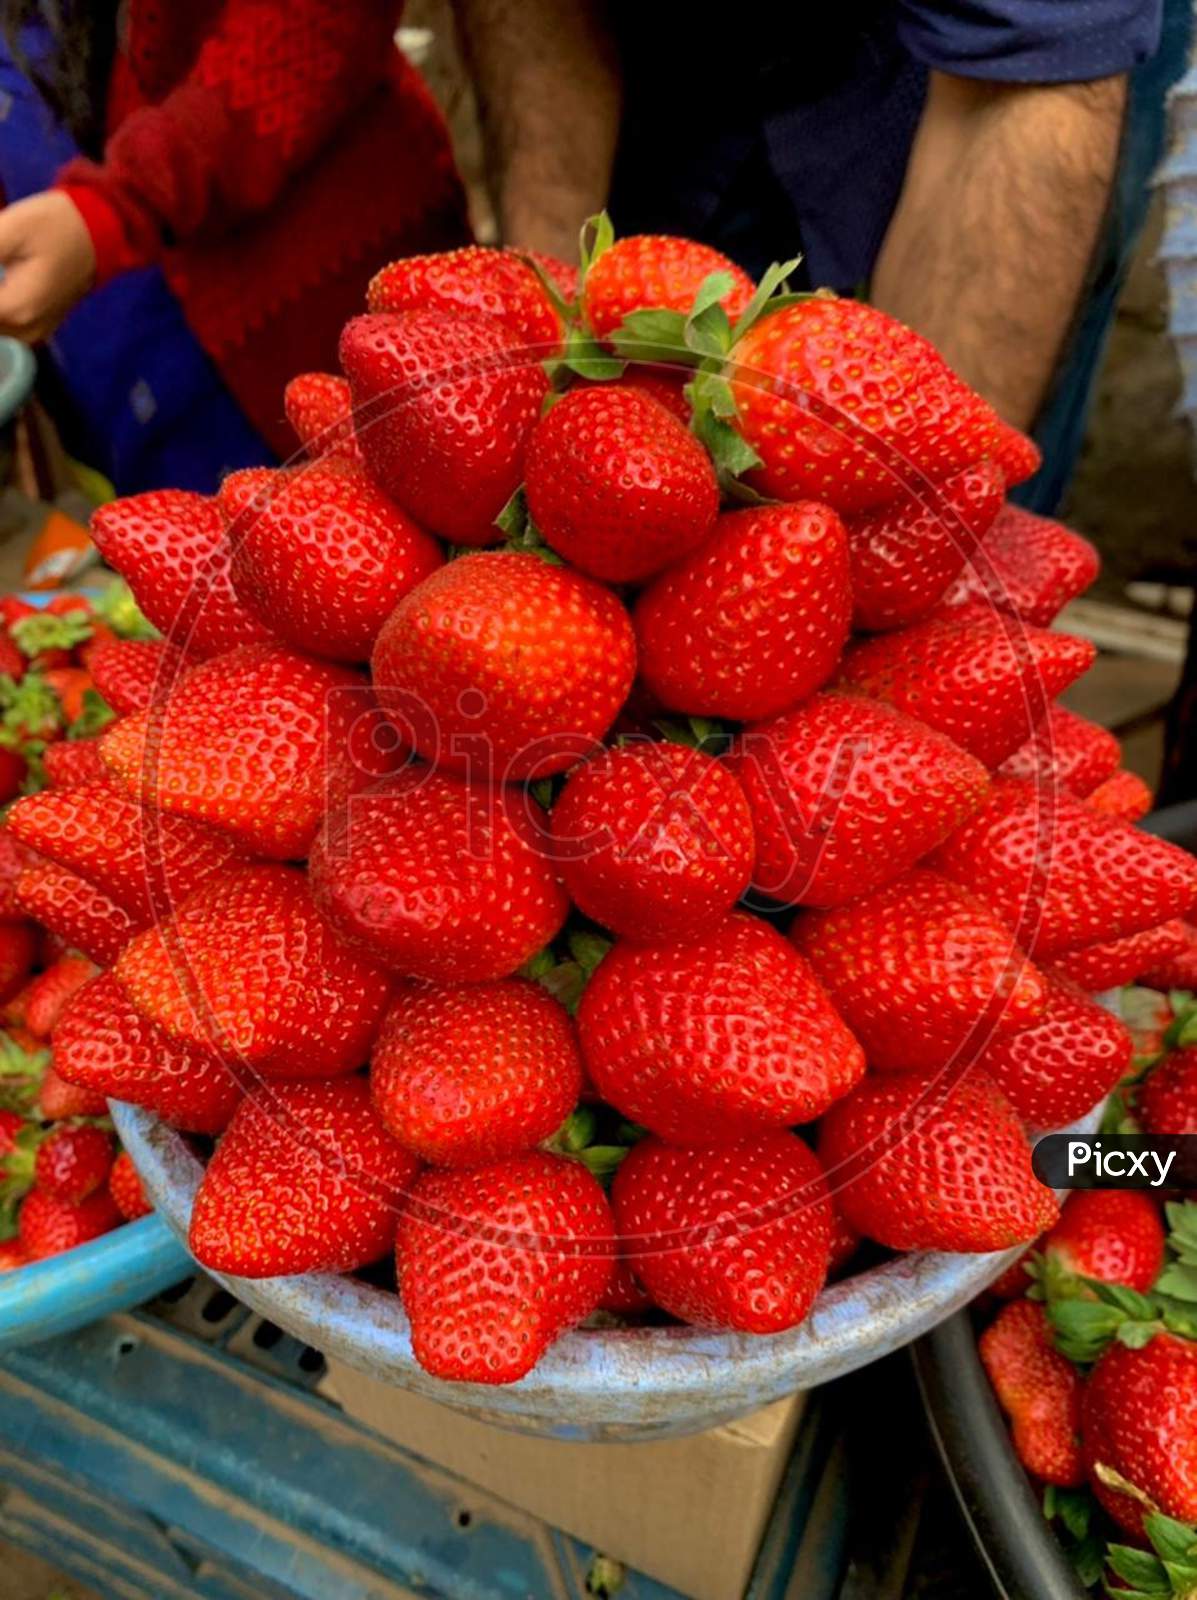 The Garden Strawberry Is A Widely Grown Hybrid Species Of The Genus Fragaria, Collectively Known As The Strawberries